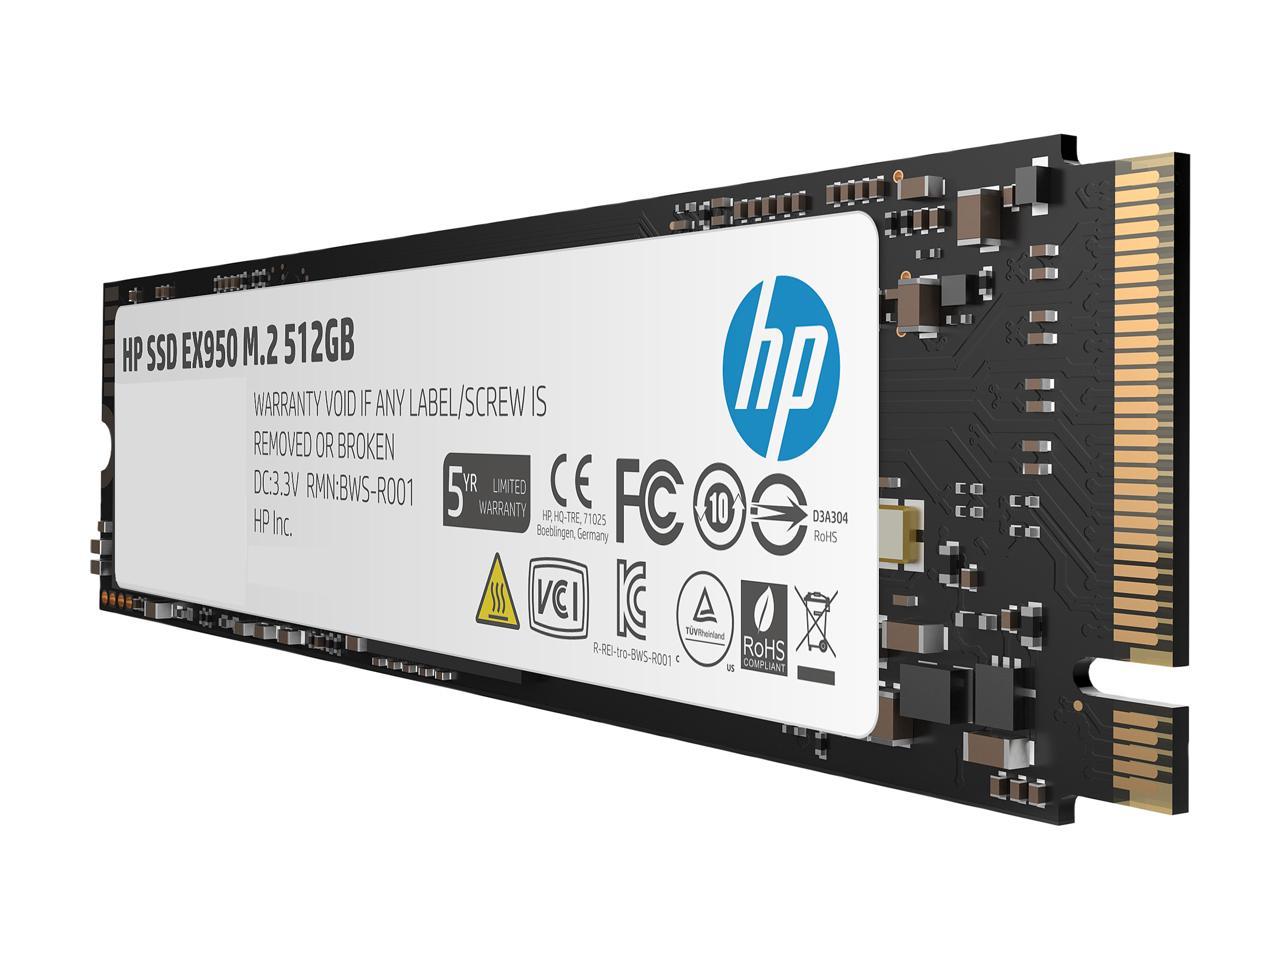 HP EX950 M.2 2280 512GB PCle Gen3 x4, NVMe1.3 3D NAND Internal Solid State Drive (SSD) 5MS22AA#ABC